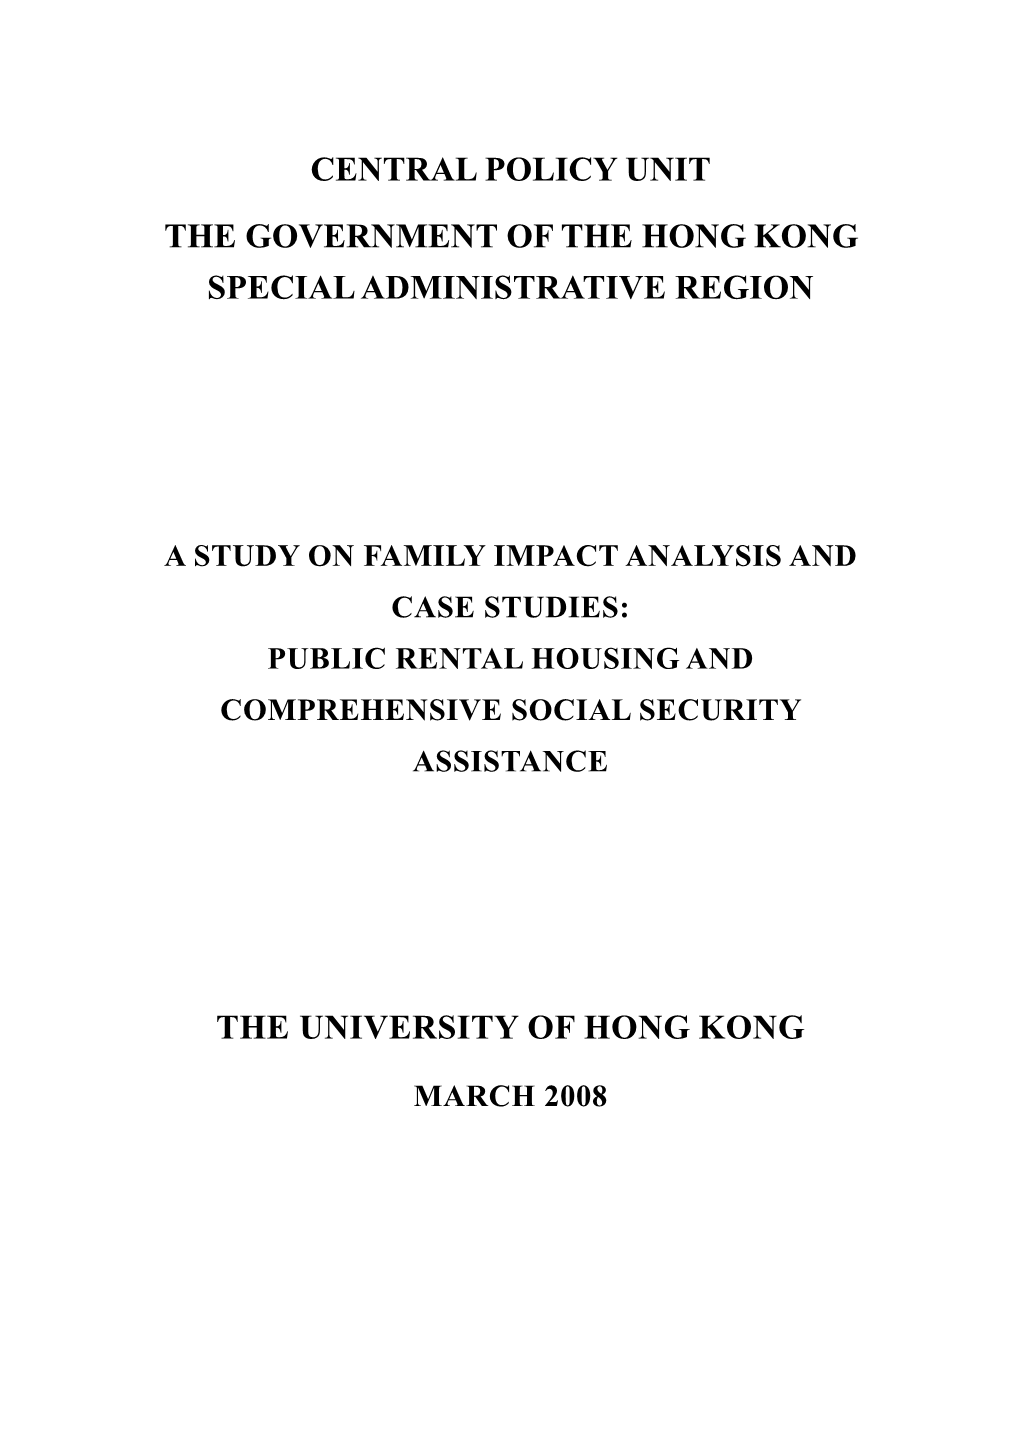 Central Policy Unit the Government of the Hong Kong Special Administrative Region